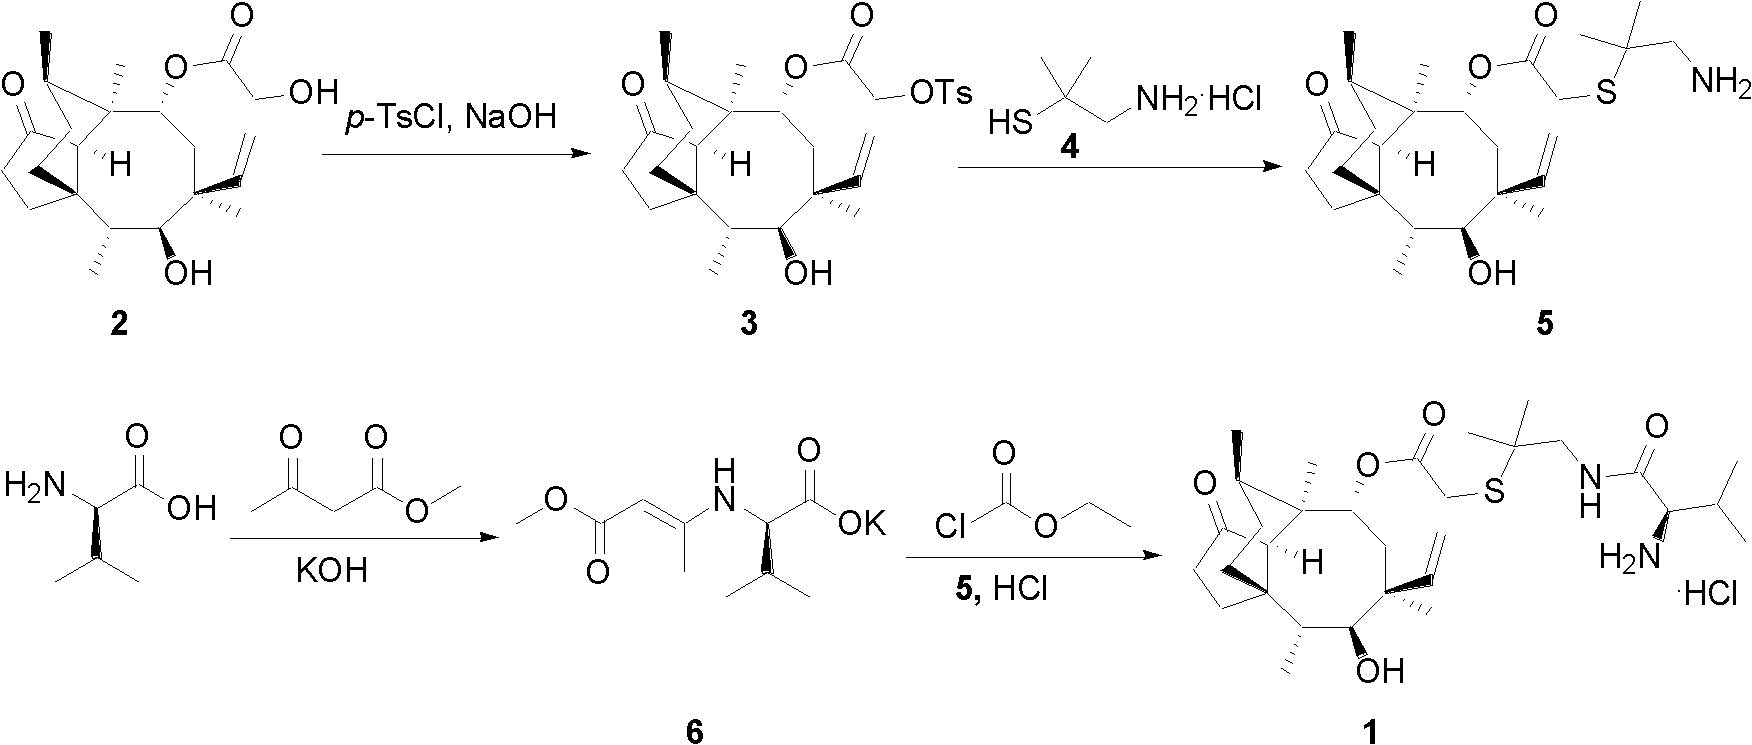 Chemical synthesis method of valnemulin hydrochloride